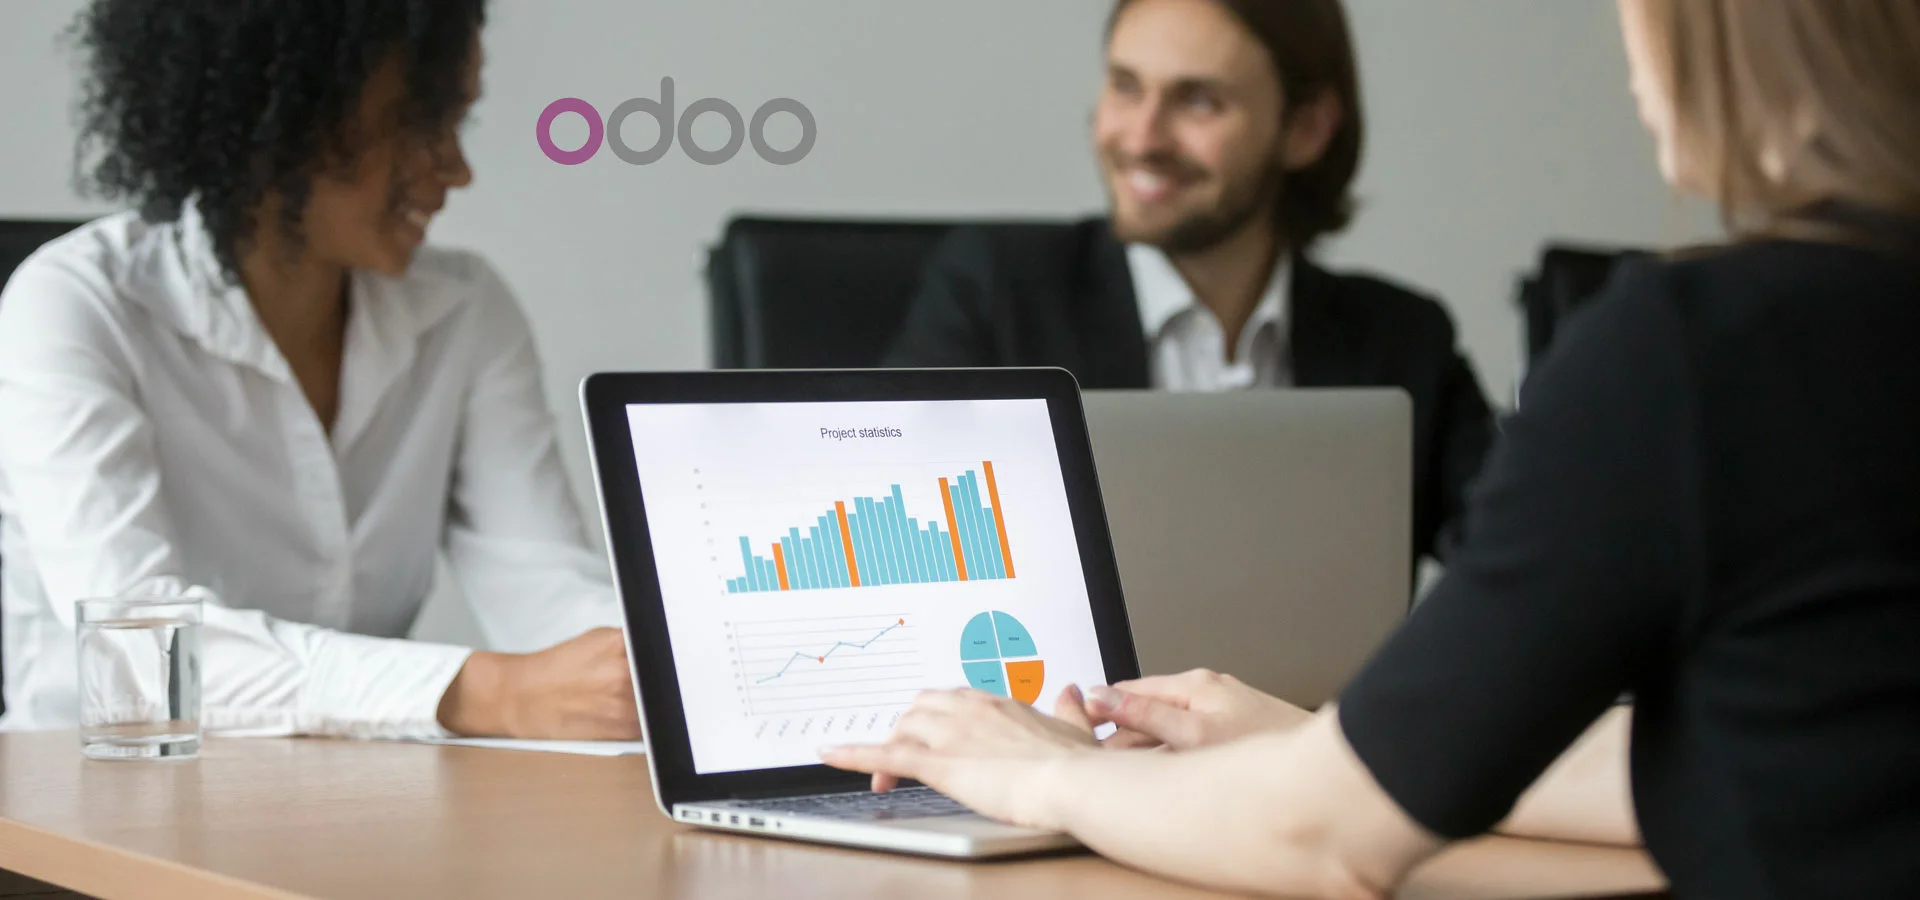 odoo-erp-support-and-services-related-blog-90